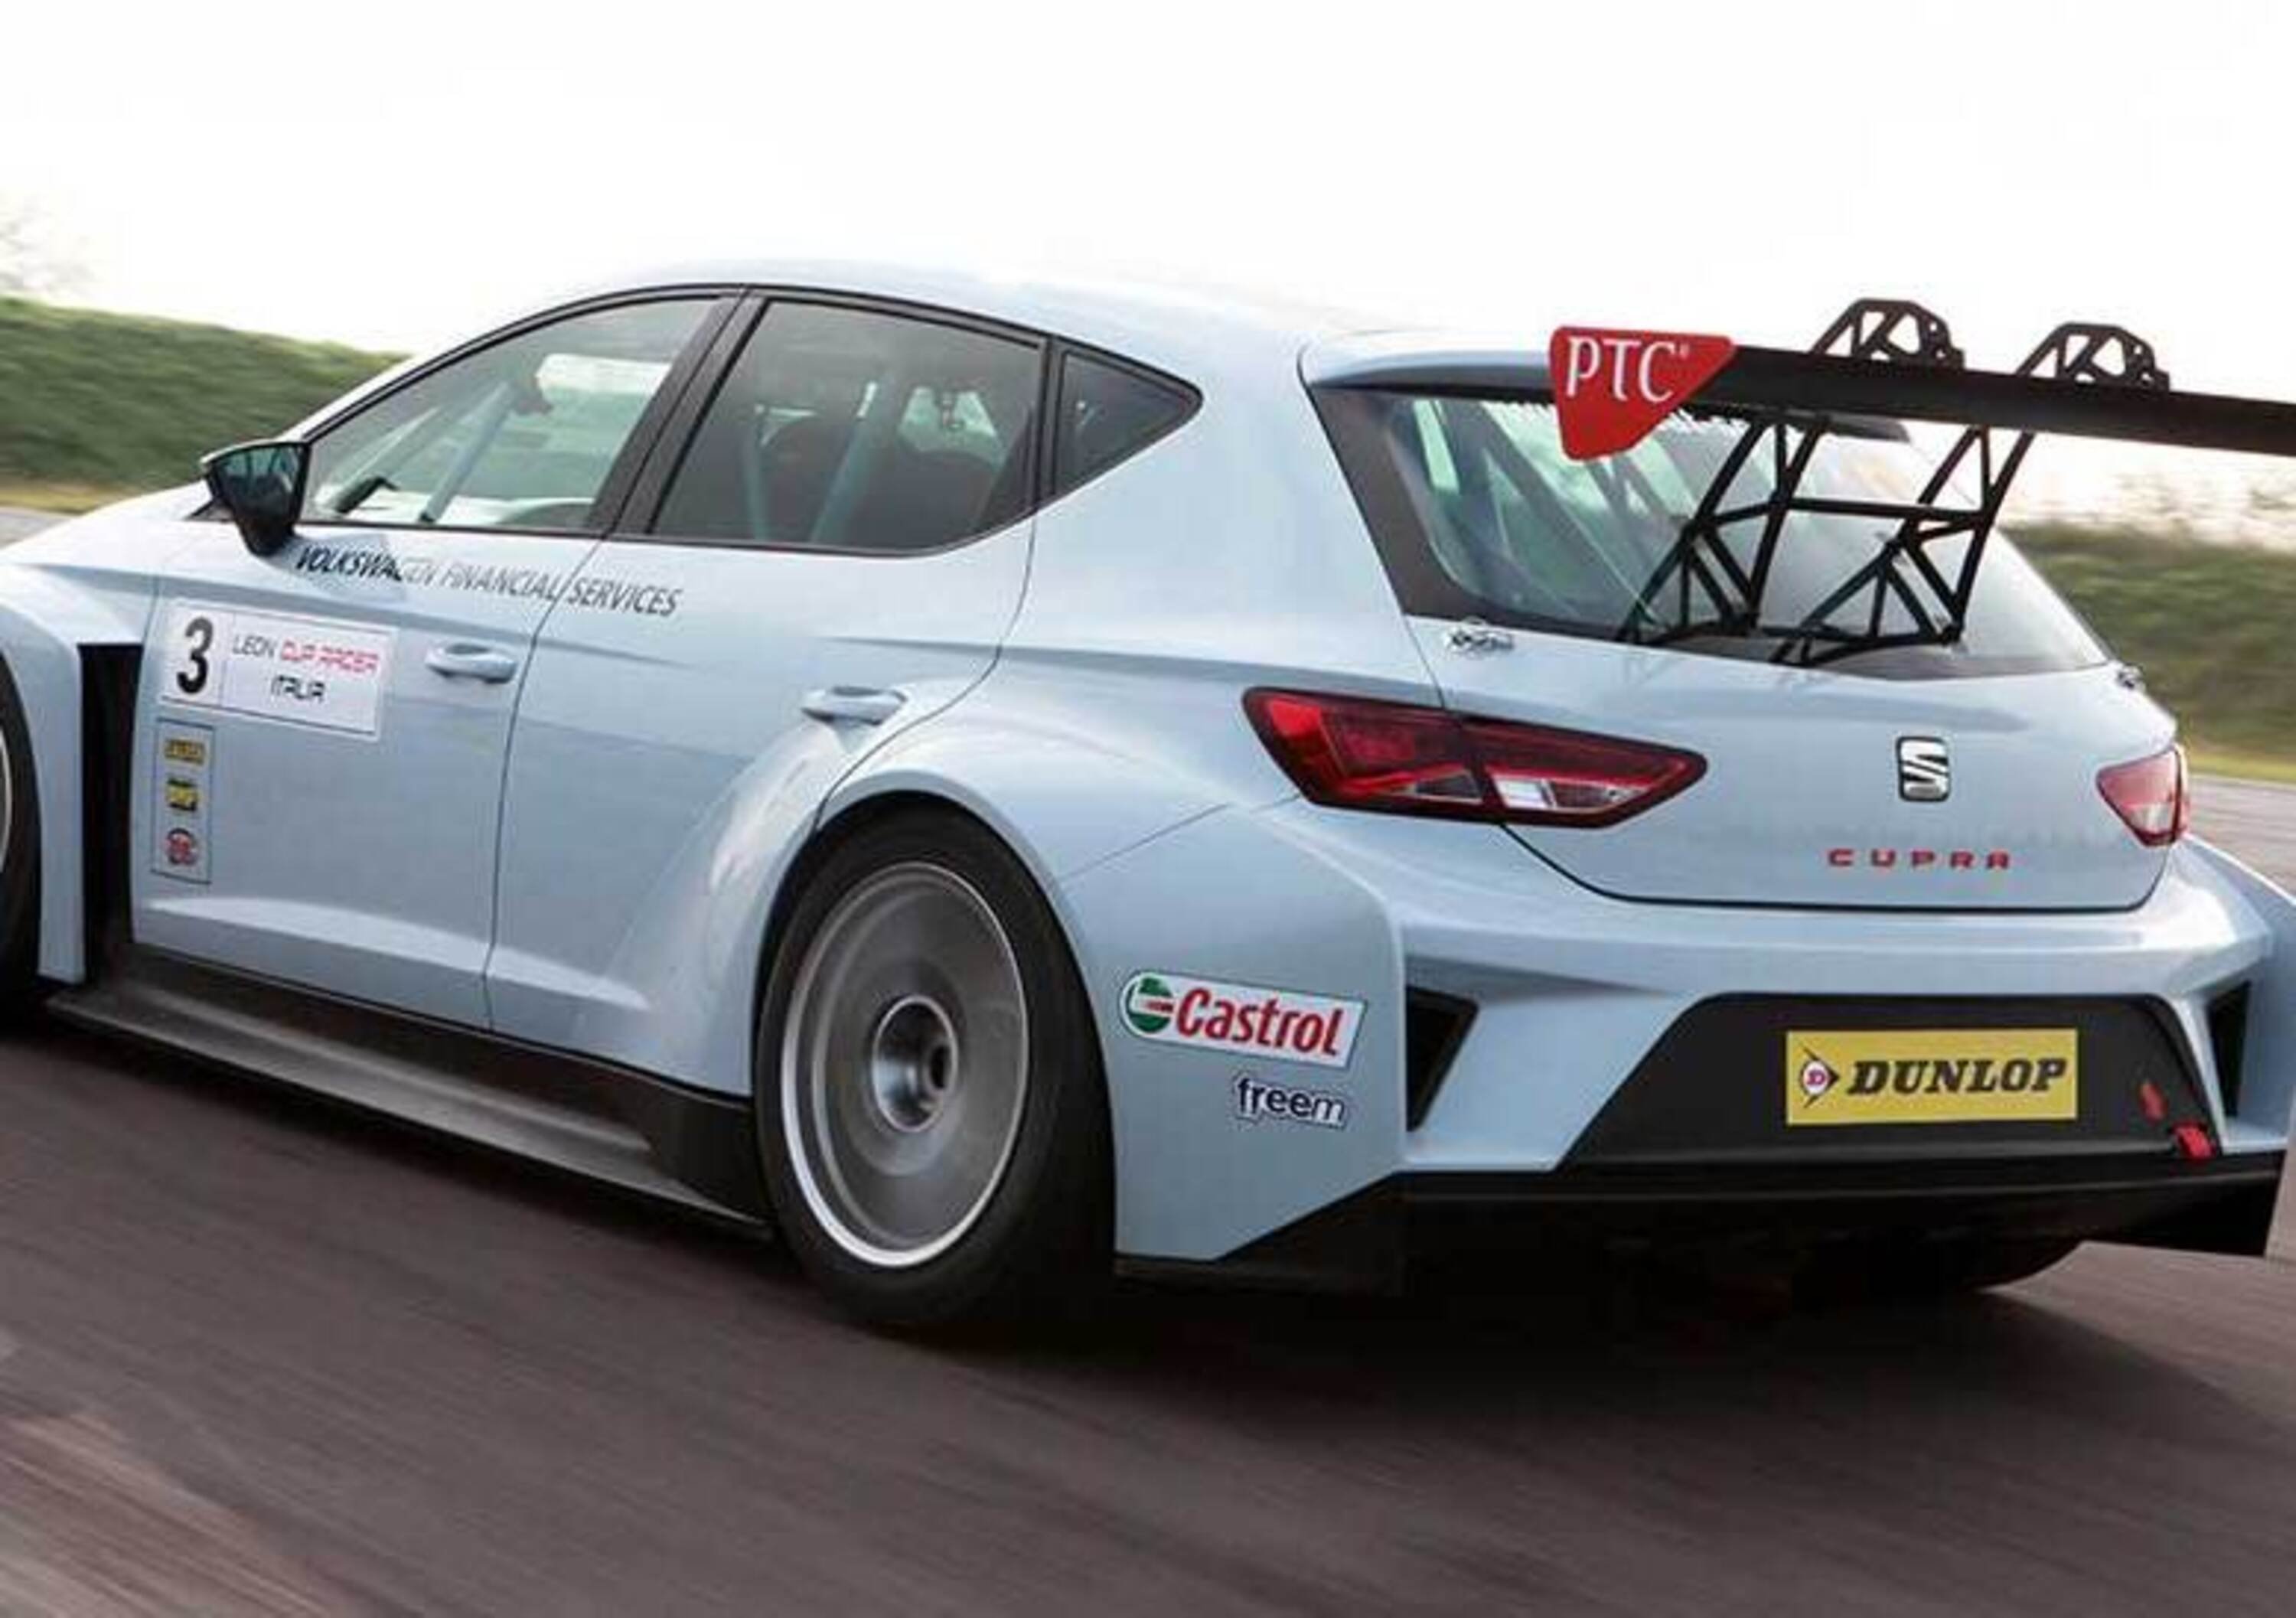 Seat Leon Cup Racer